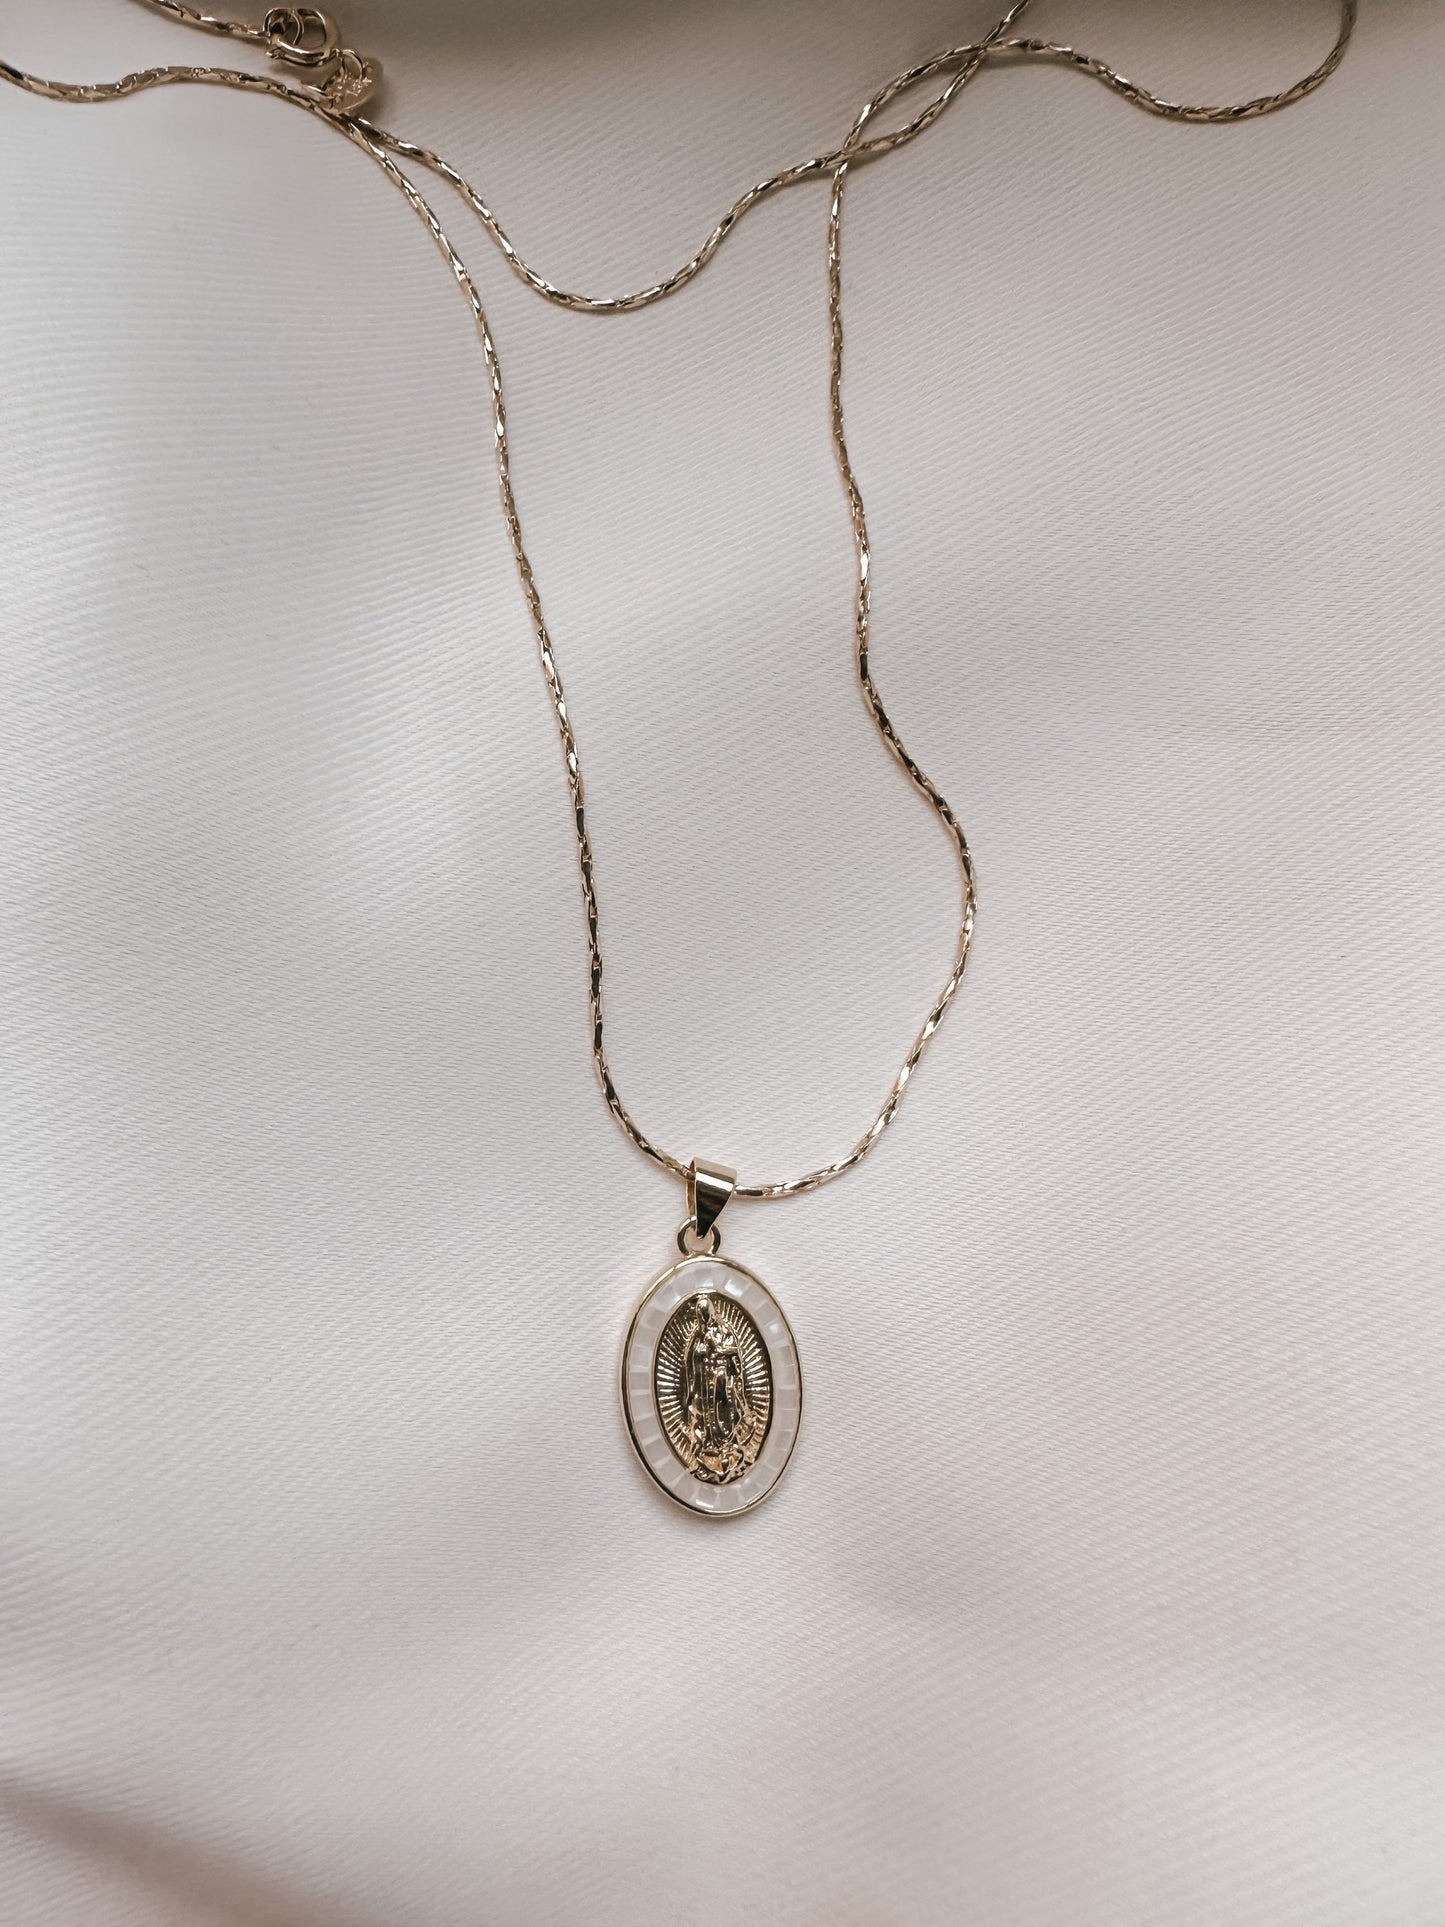 White Virgin Mary Necklace. Gold plated  Virgin Mary necklace gold filled chain cadena de virgencita blanca